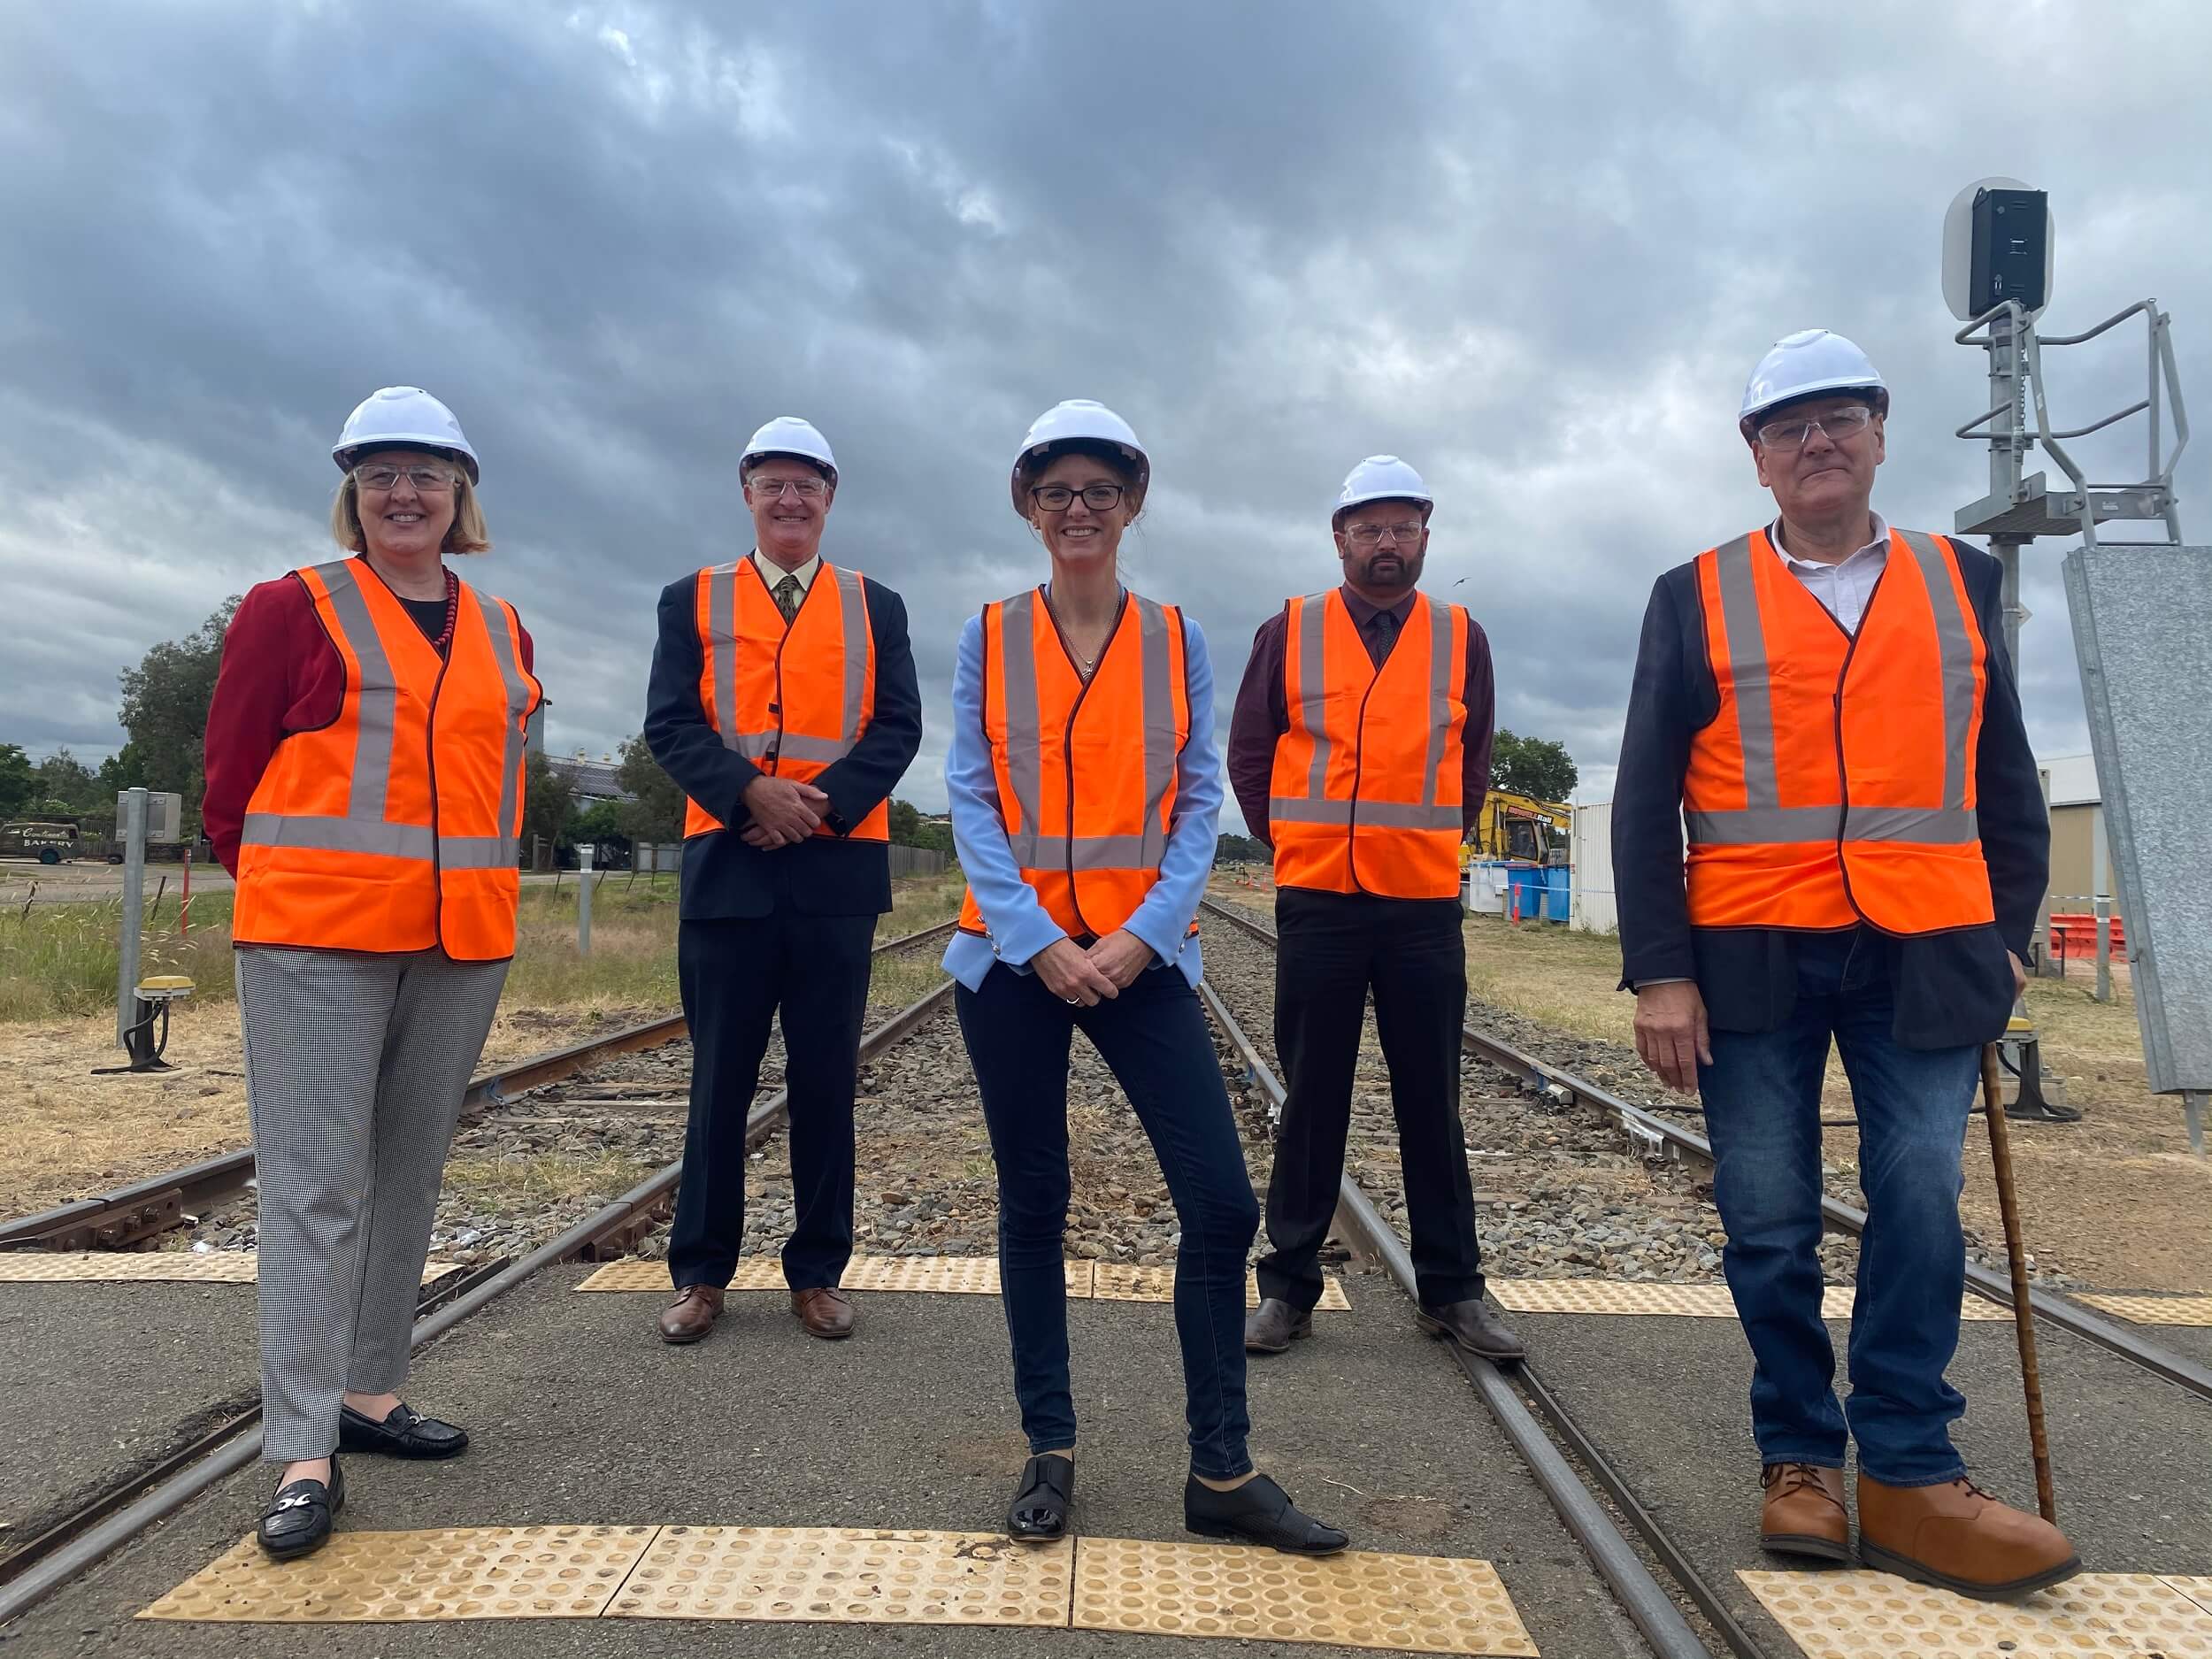 Sam Knight, Luke Taberner, Steph Cooke MP, Cole Davis Neil Smith stand on railway lines, wearing high vis vests and hard hats.